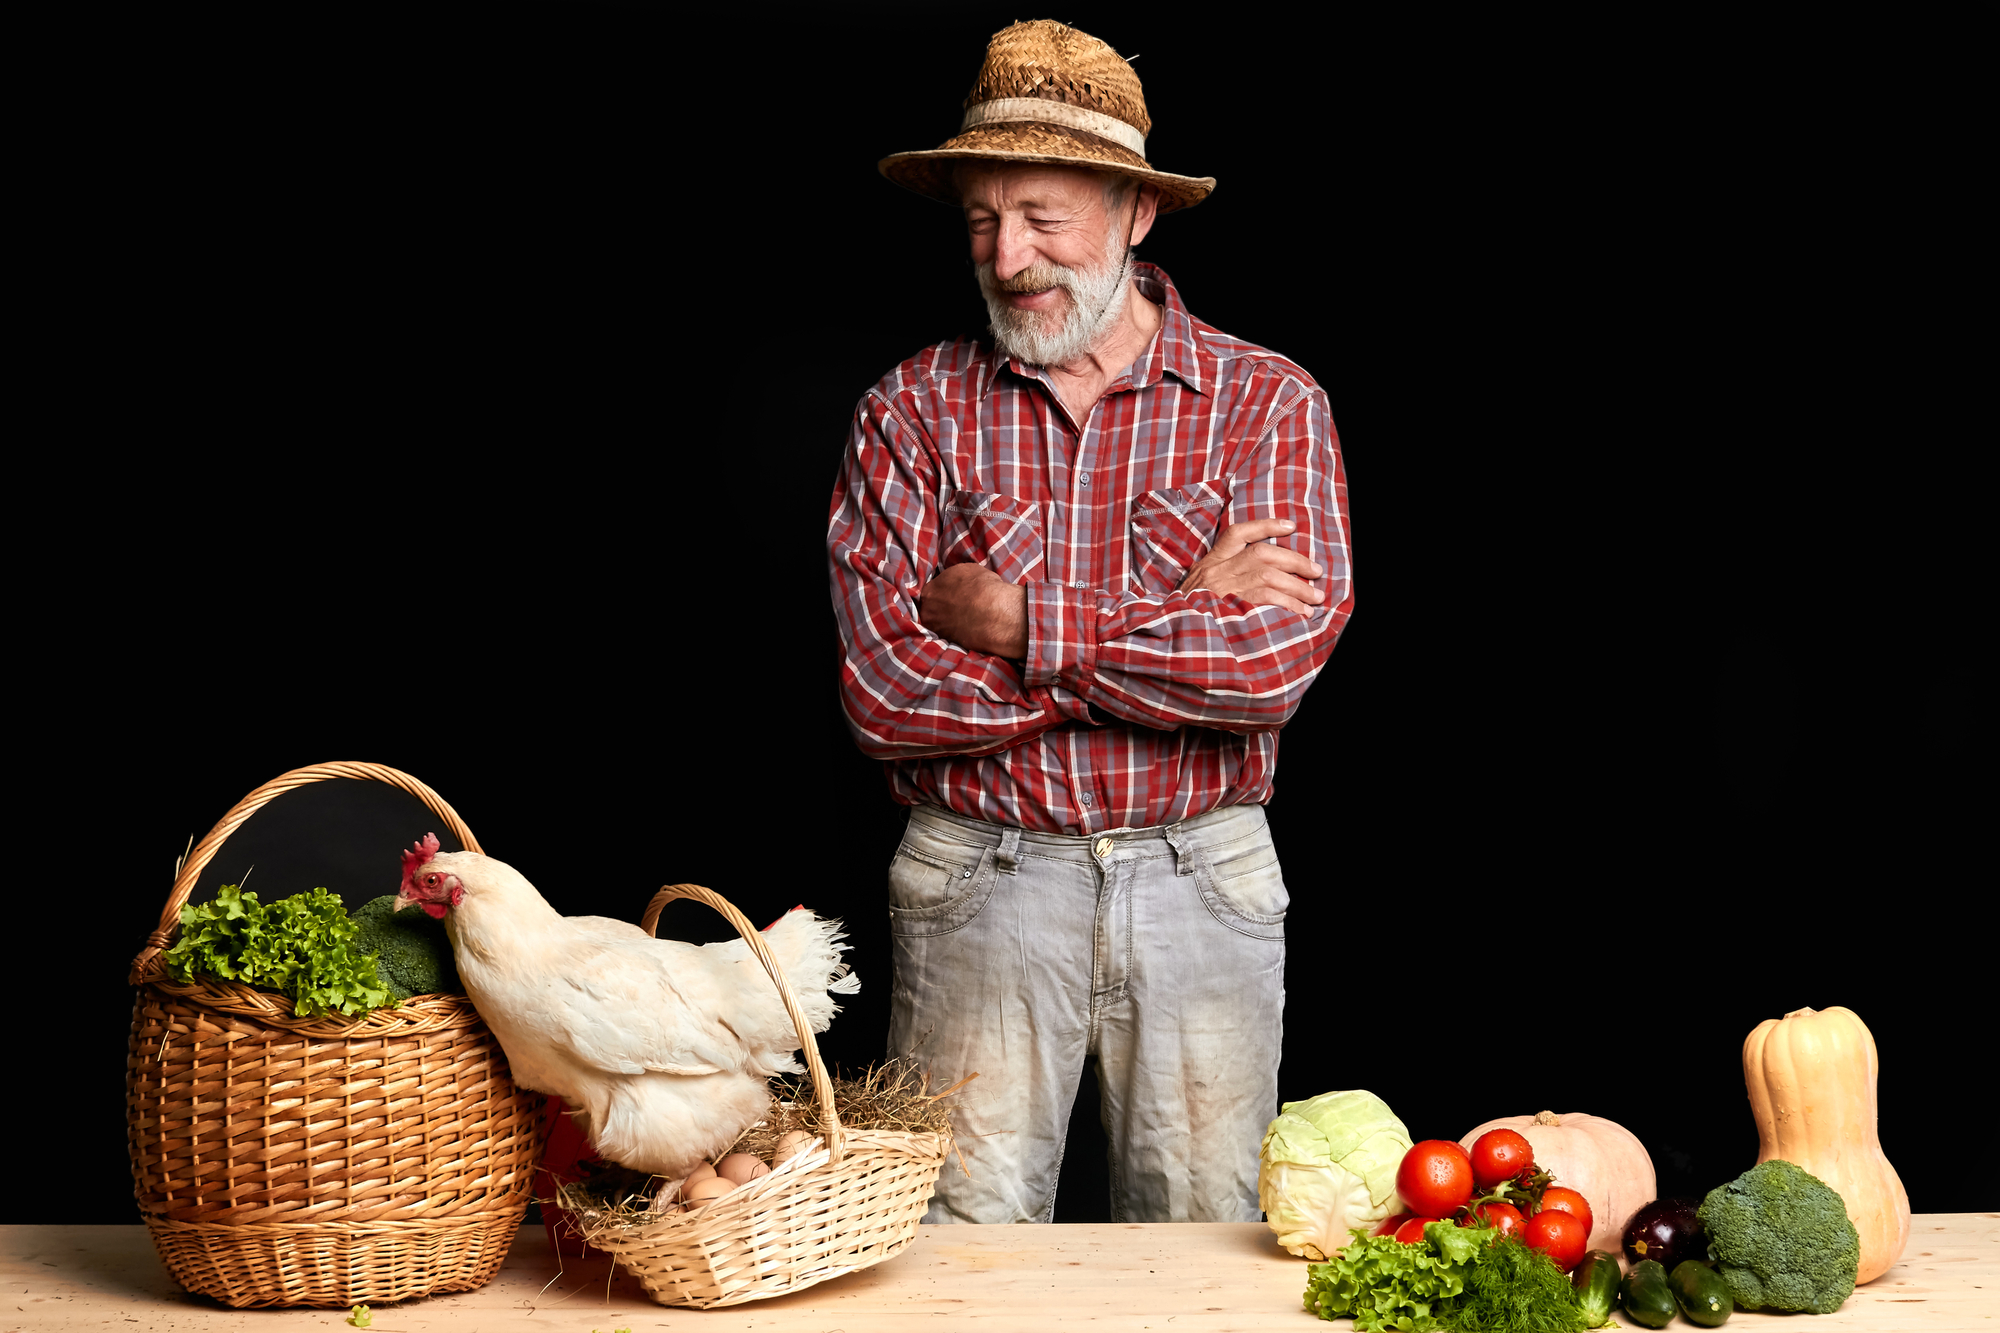 Mature farmer giggling and looking at hen jumping out of basket with fresh eggs